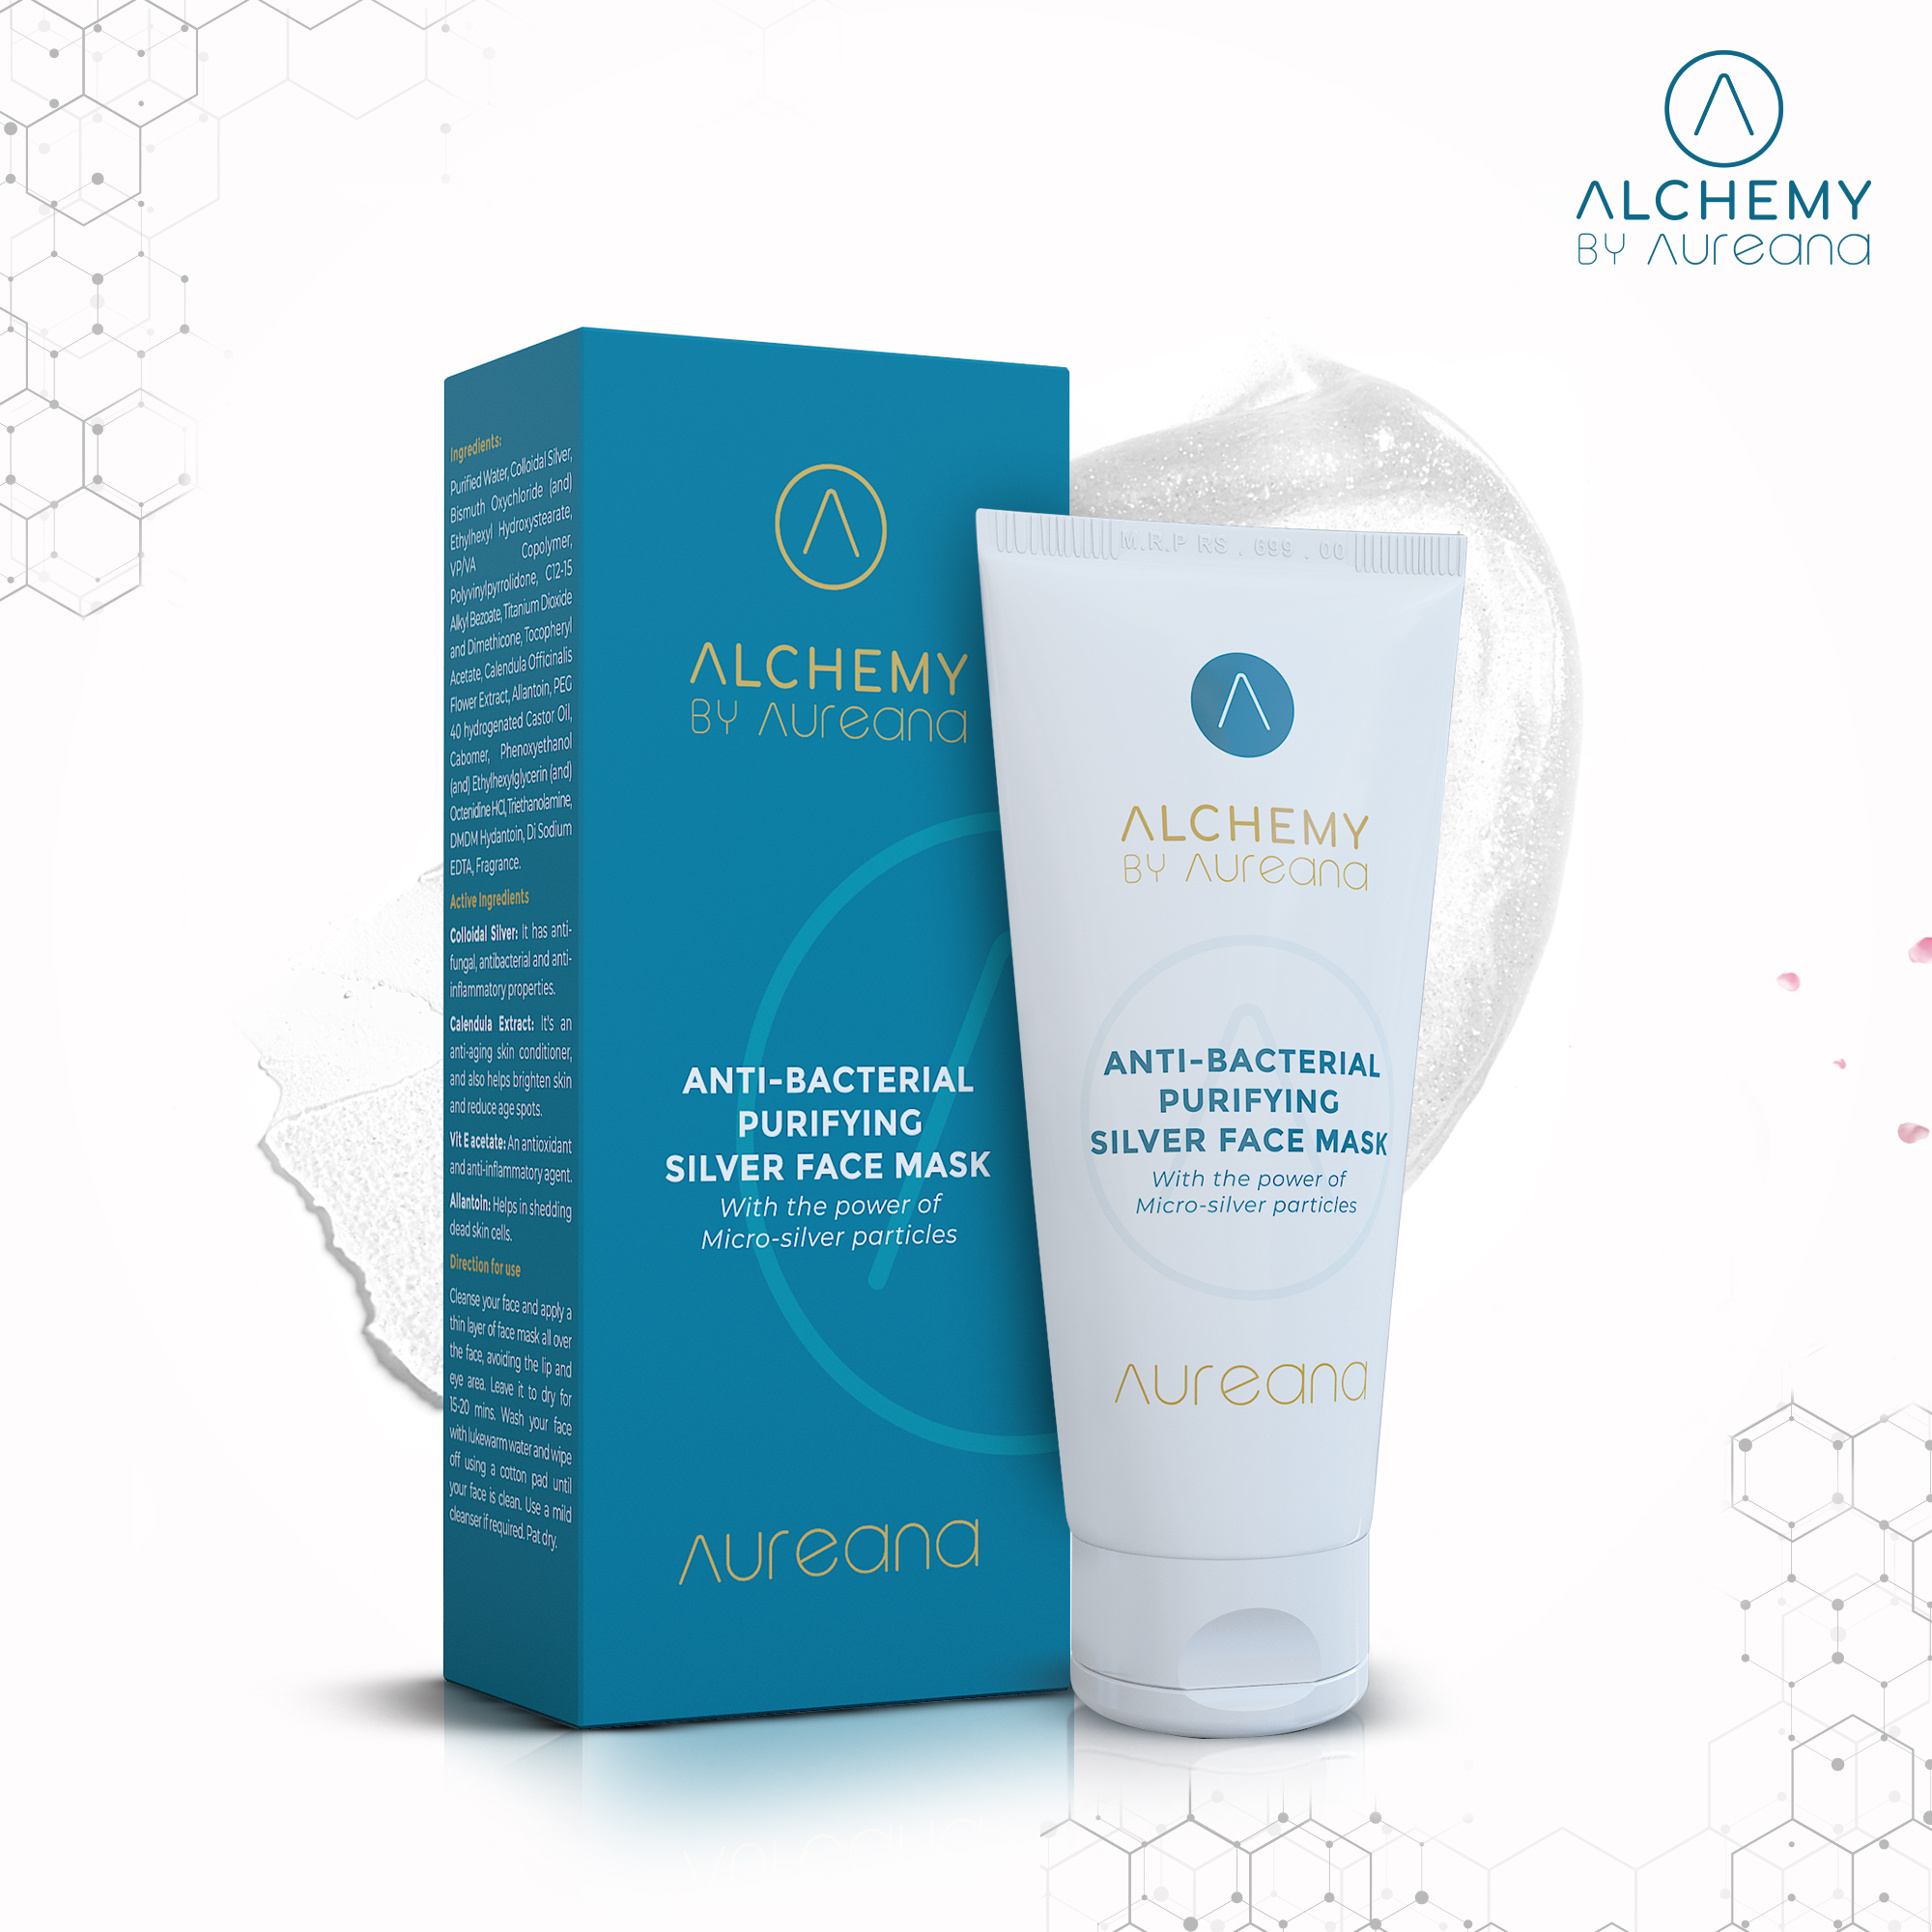 Alchemy By Aureana Antibacterial Purifying Silver Face Mask 50g